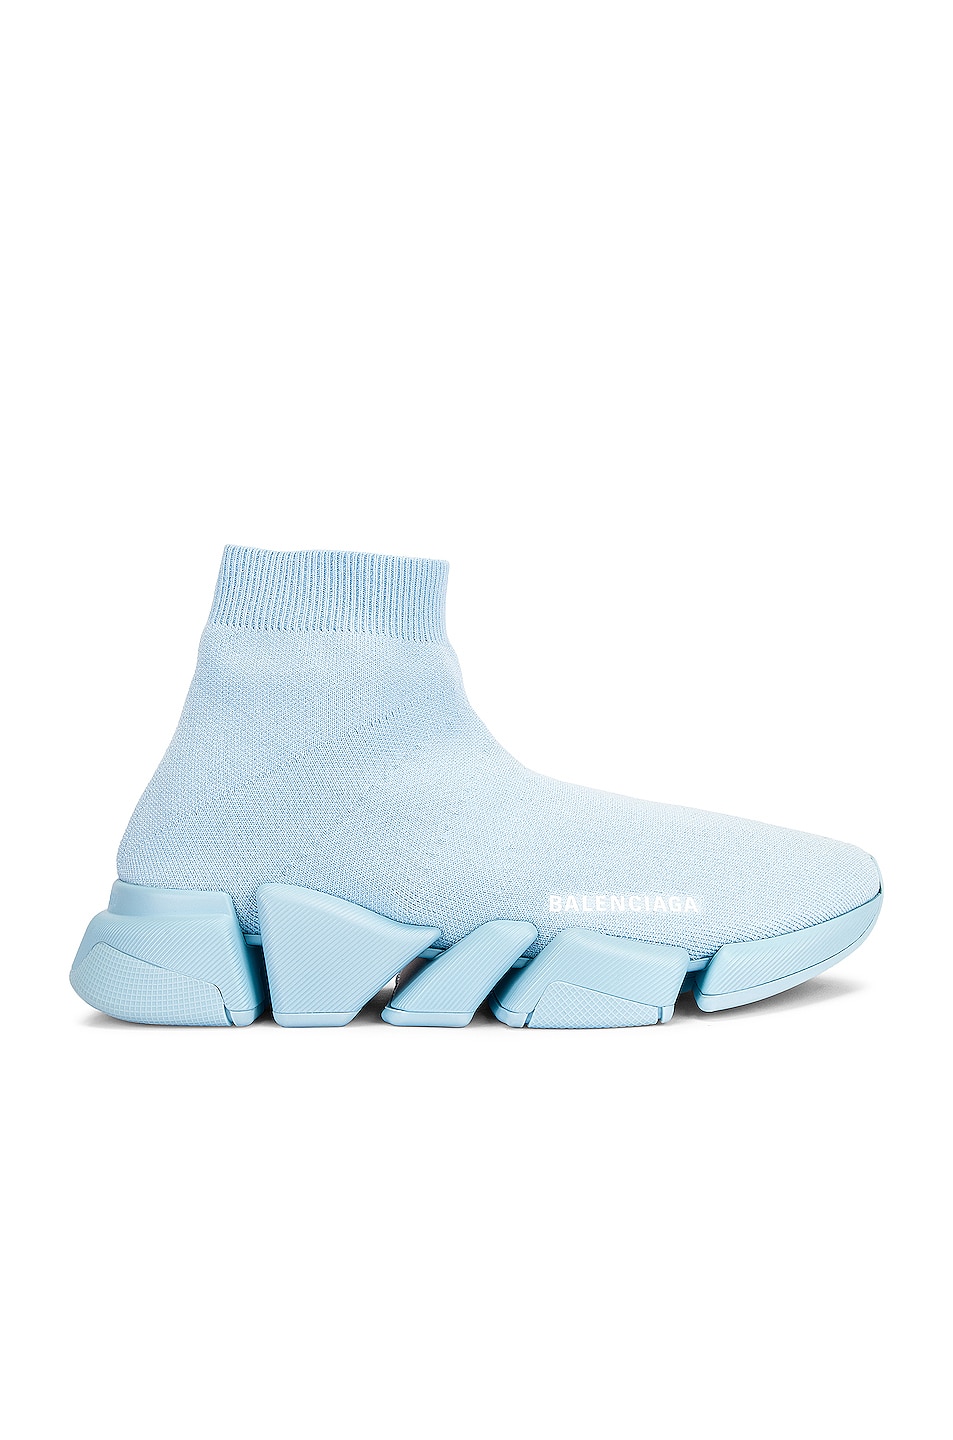 Image 1 of Balenciaga Speed 2.0 Lt Sneakers in Light Blue